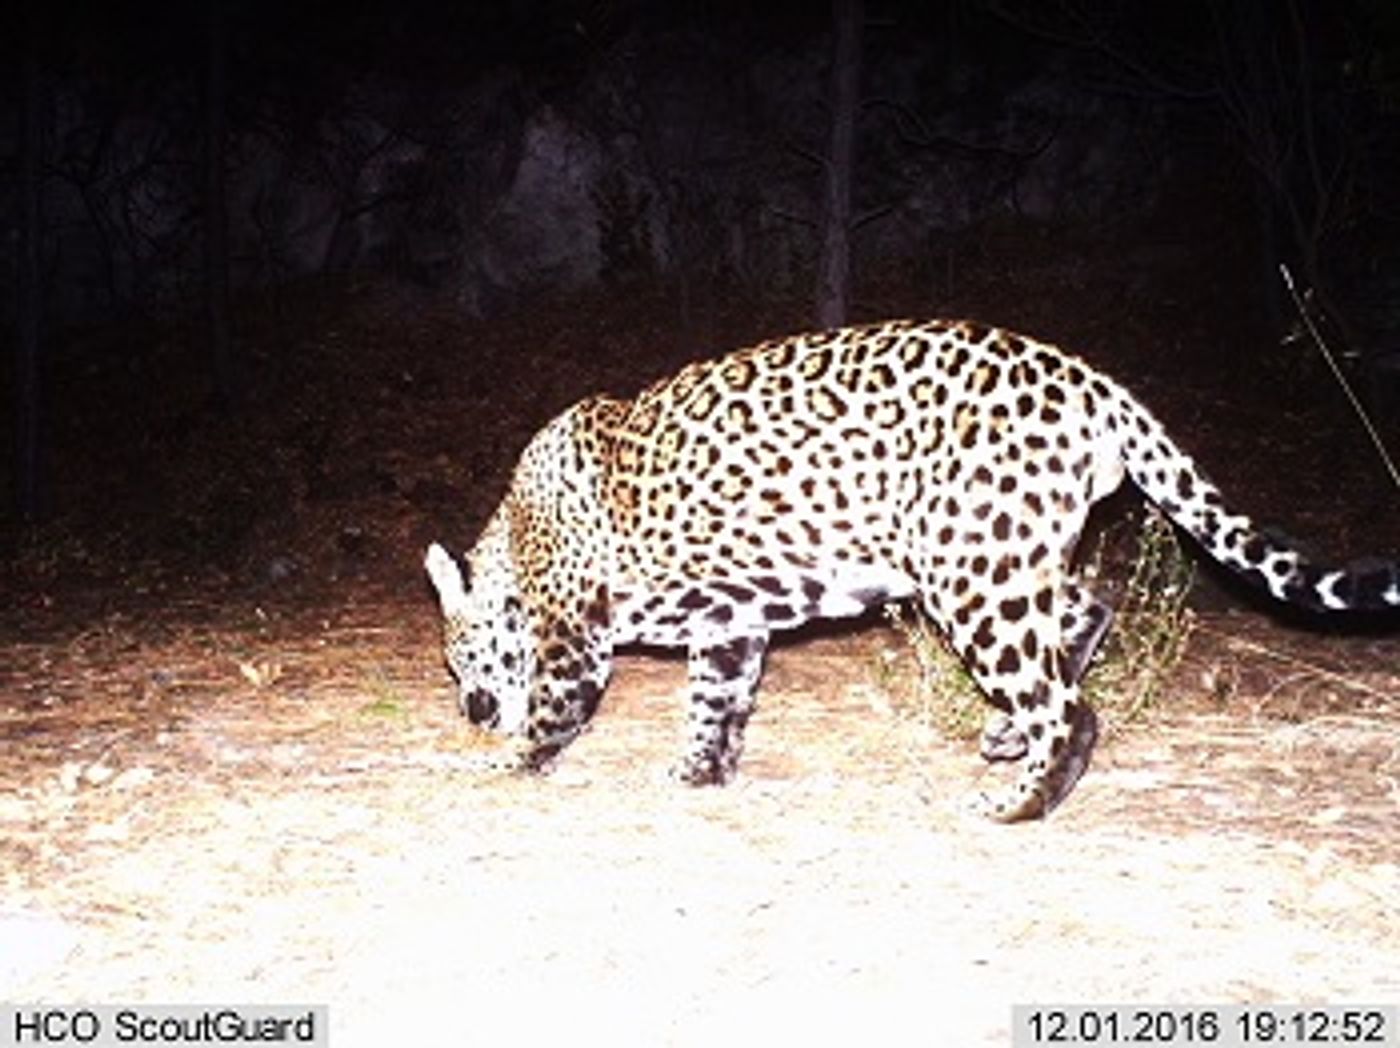 A wild jaguar was spotted in Arizona earlier this month, something you just don't see every day.